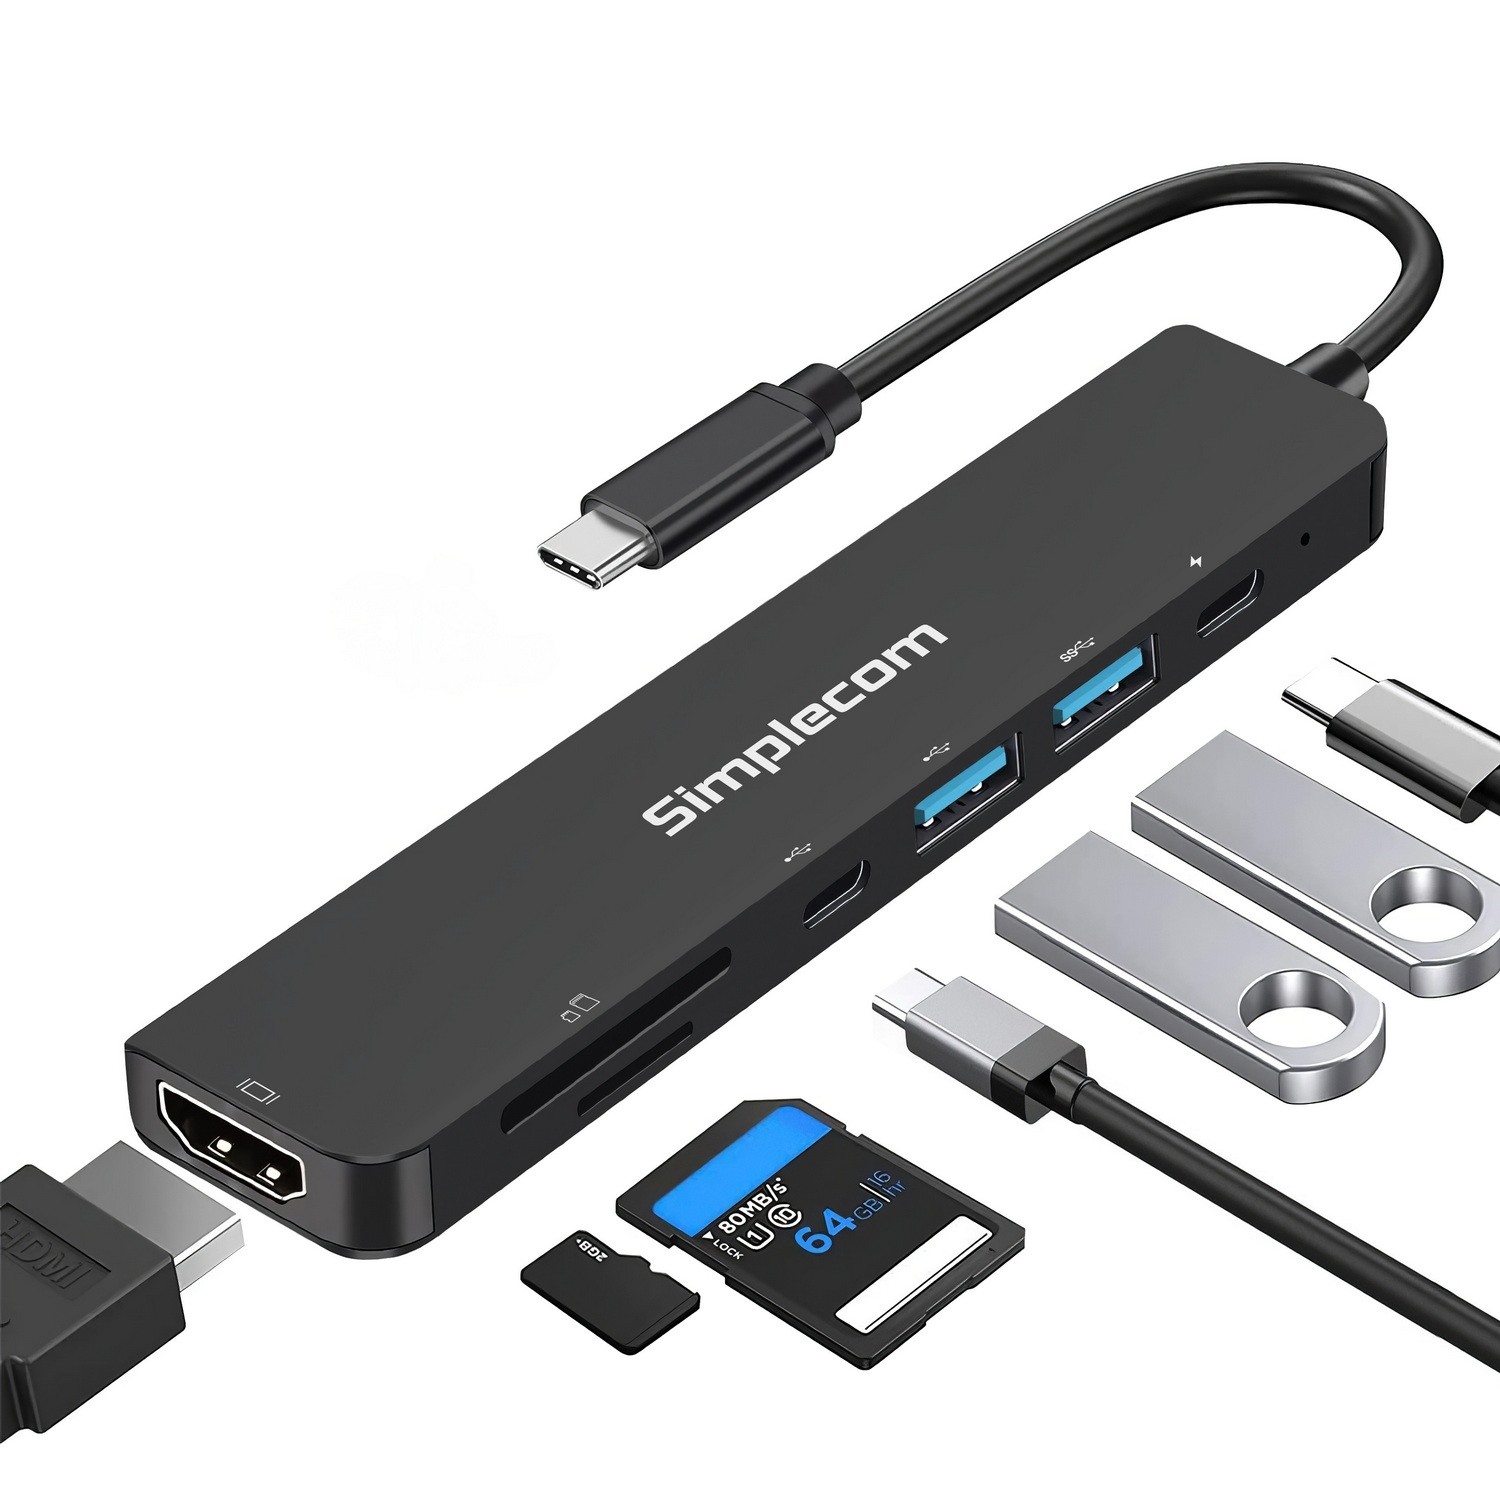 Buy Potronics Mport 7 Type C USB hub with 7 USB ports for PC or Laptop